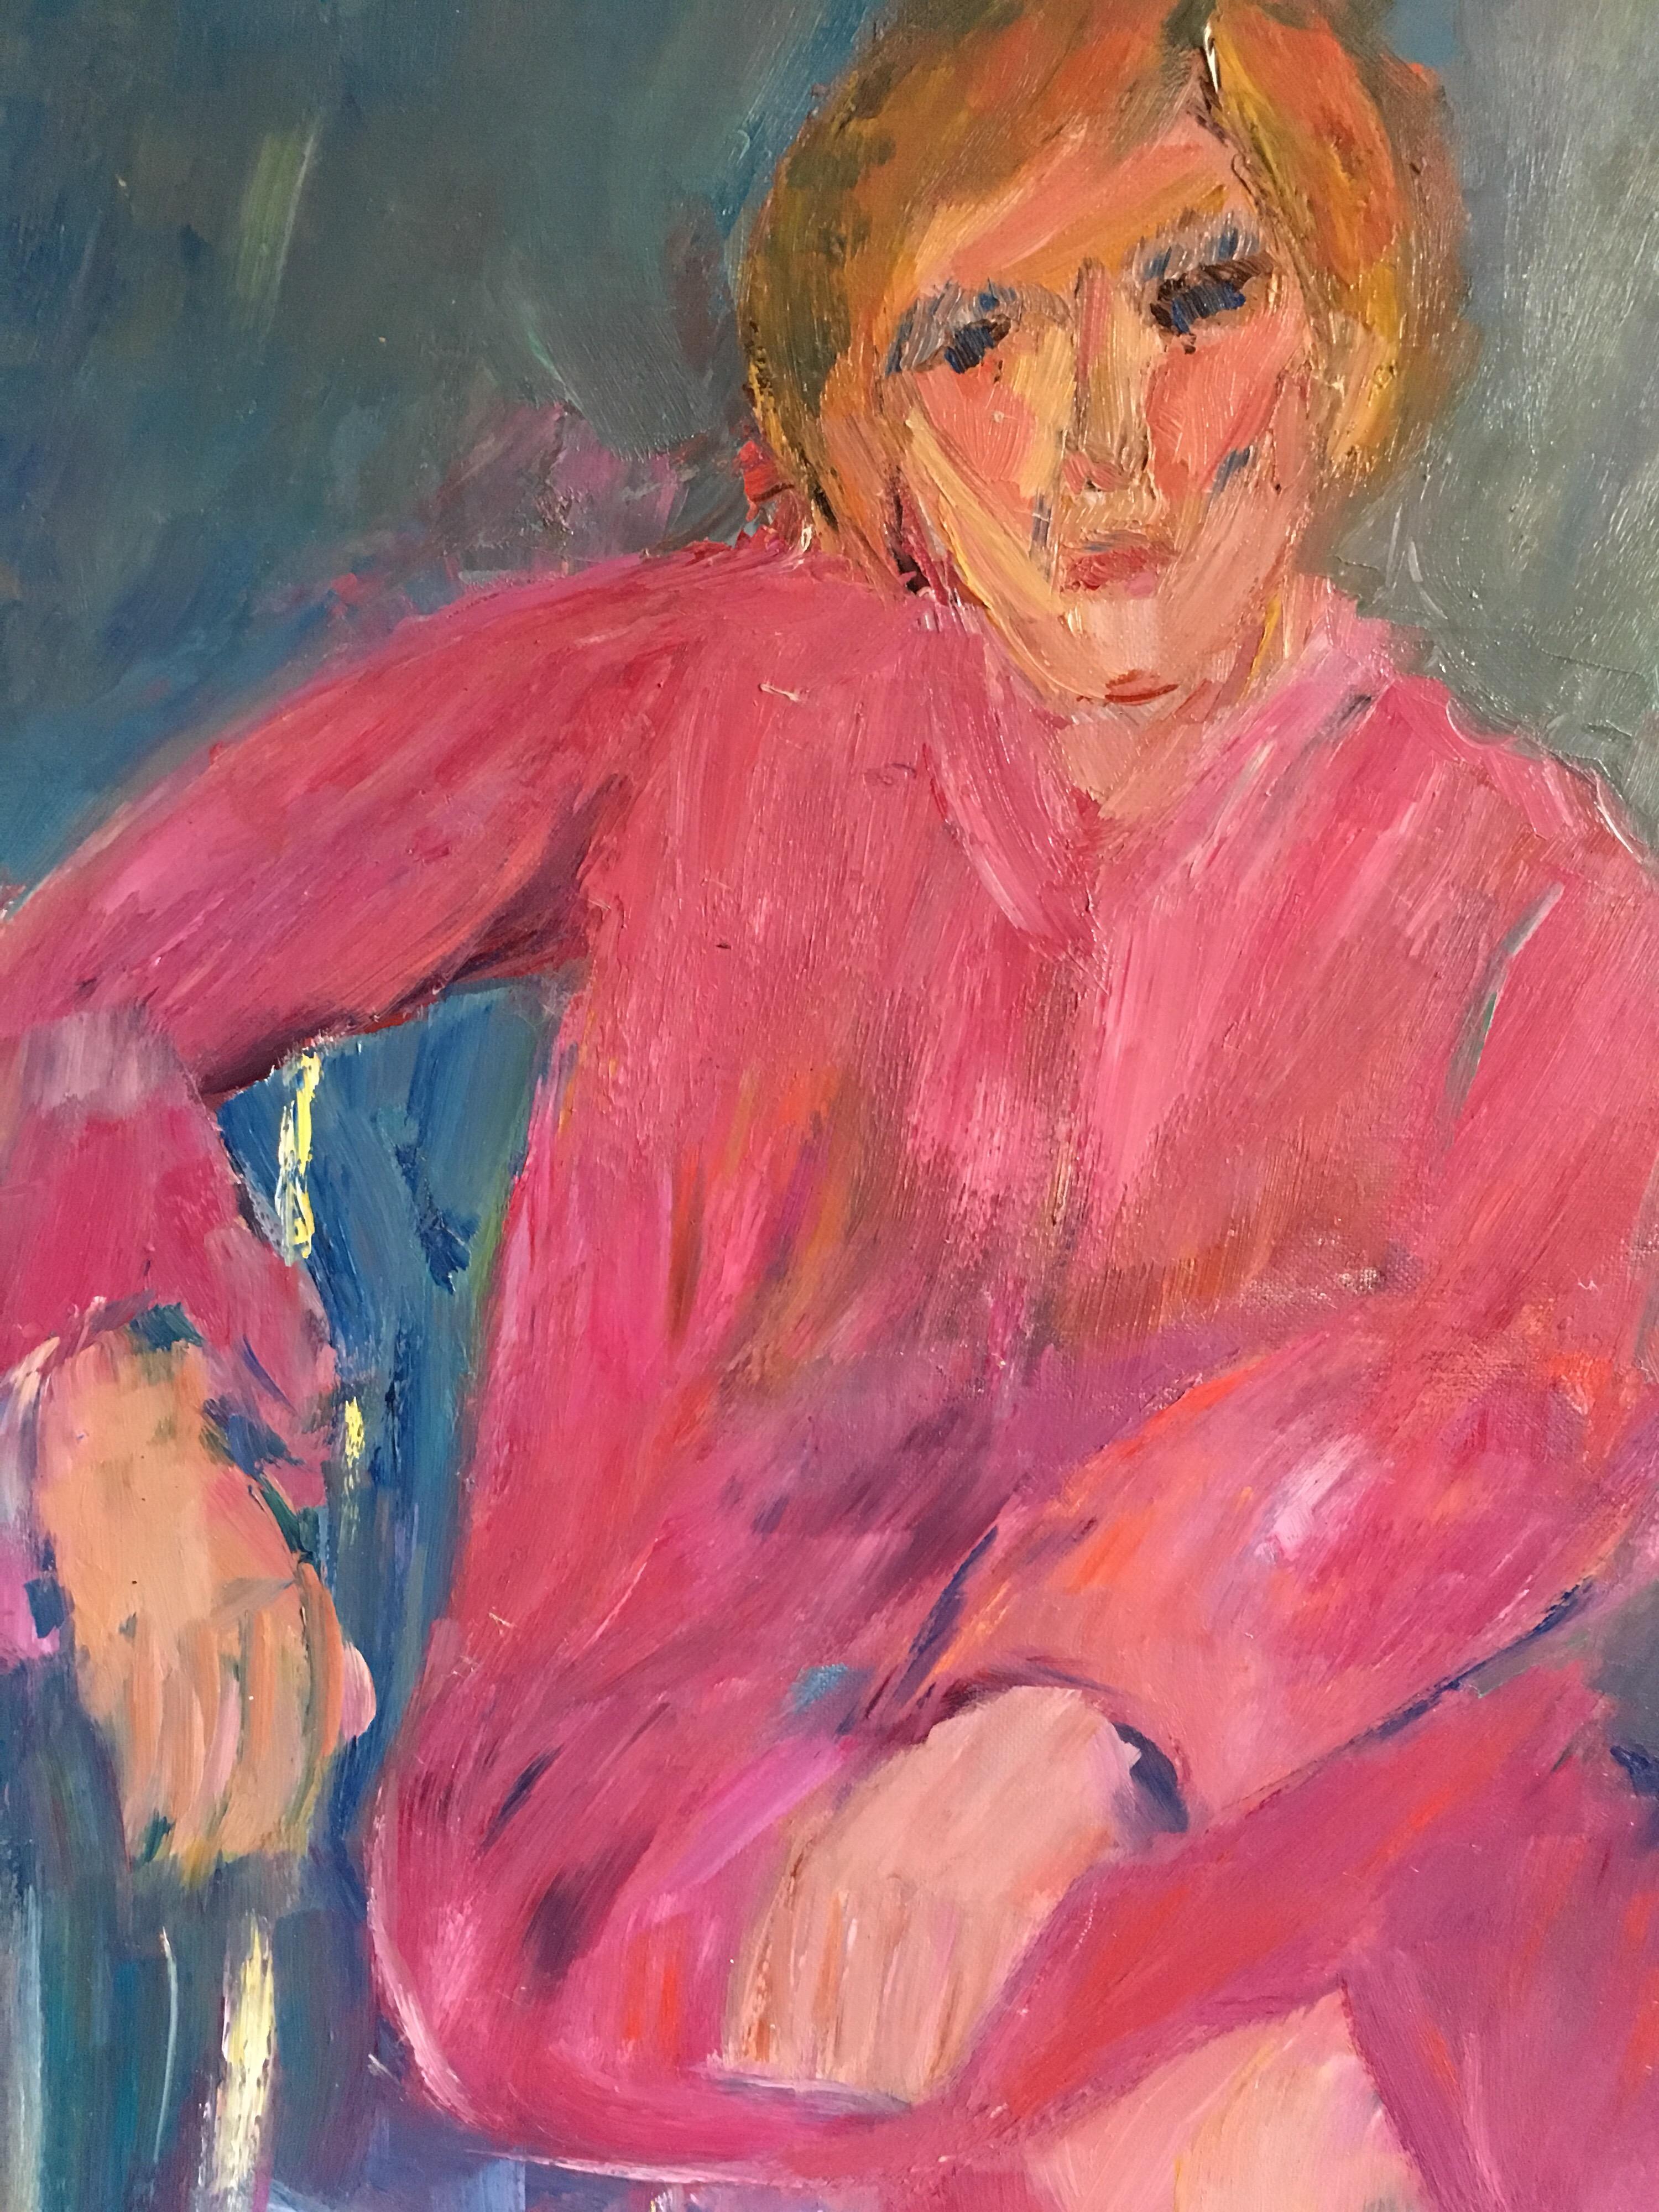 Pink Lady, Impressionist Portrait, Oil Painting
By French artist Garnvault, 20th Century
Signed by the artist verso
Oil painting on canvas, unframed
Canvas size: 21.5 x 18 inches

Superb original oil painting by the 20th century French painter,